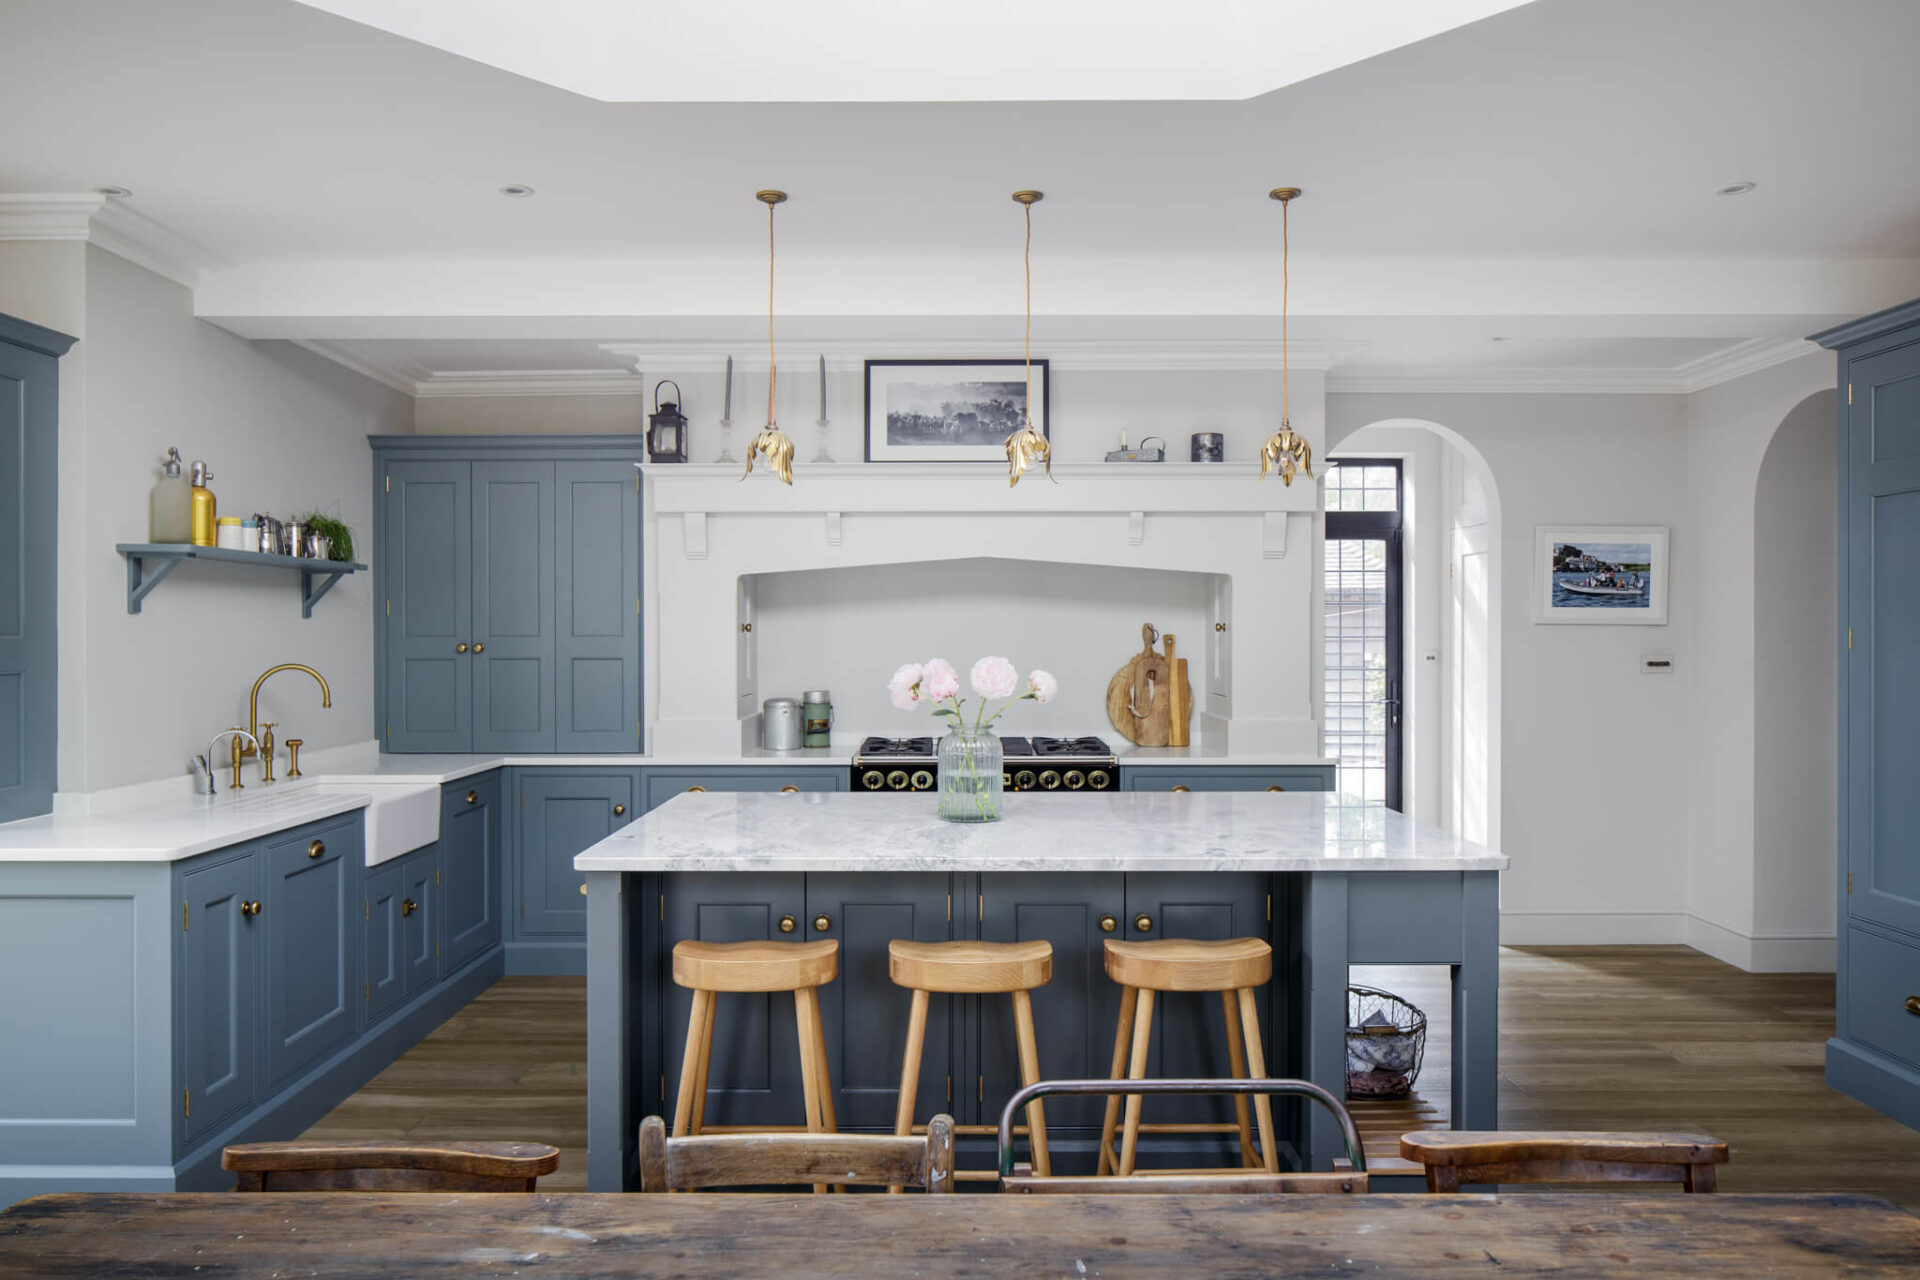 bespoke kitchen with a well-placed kitchen island